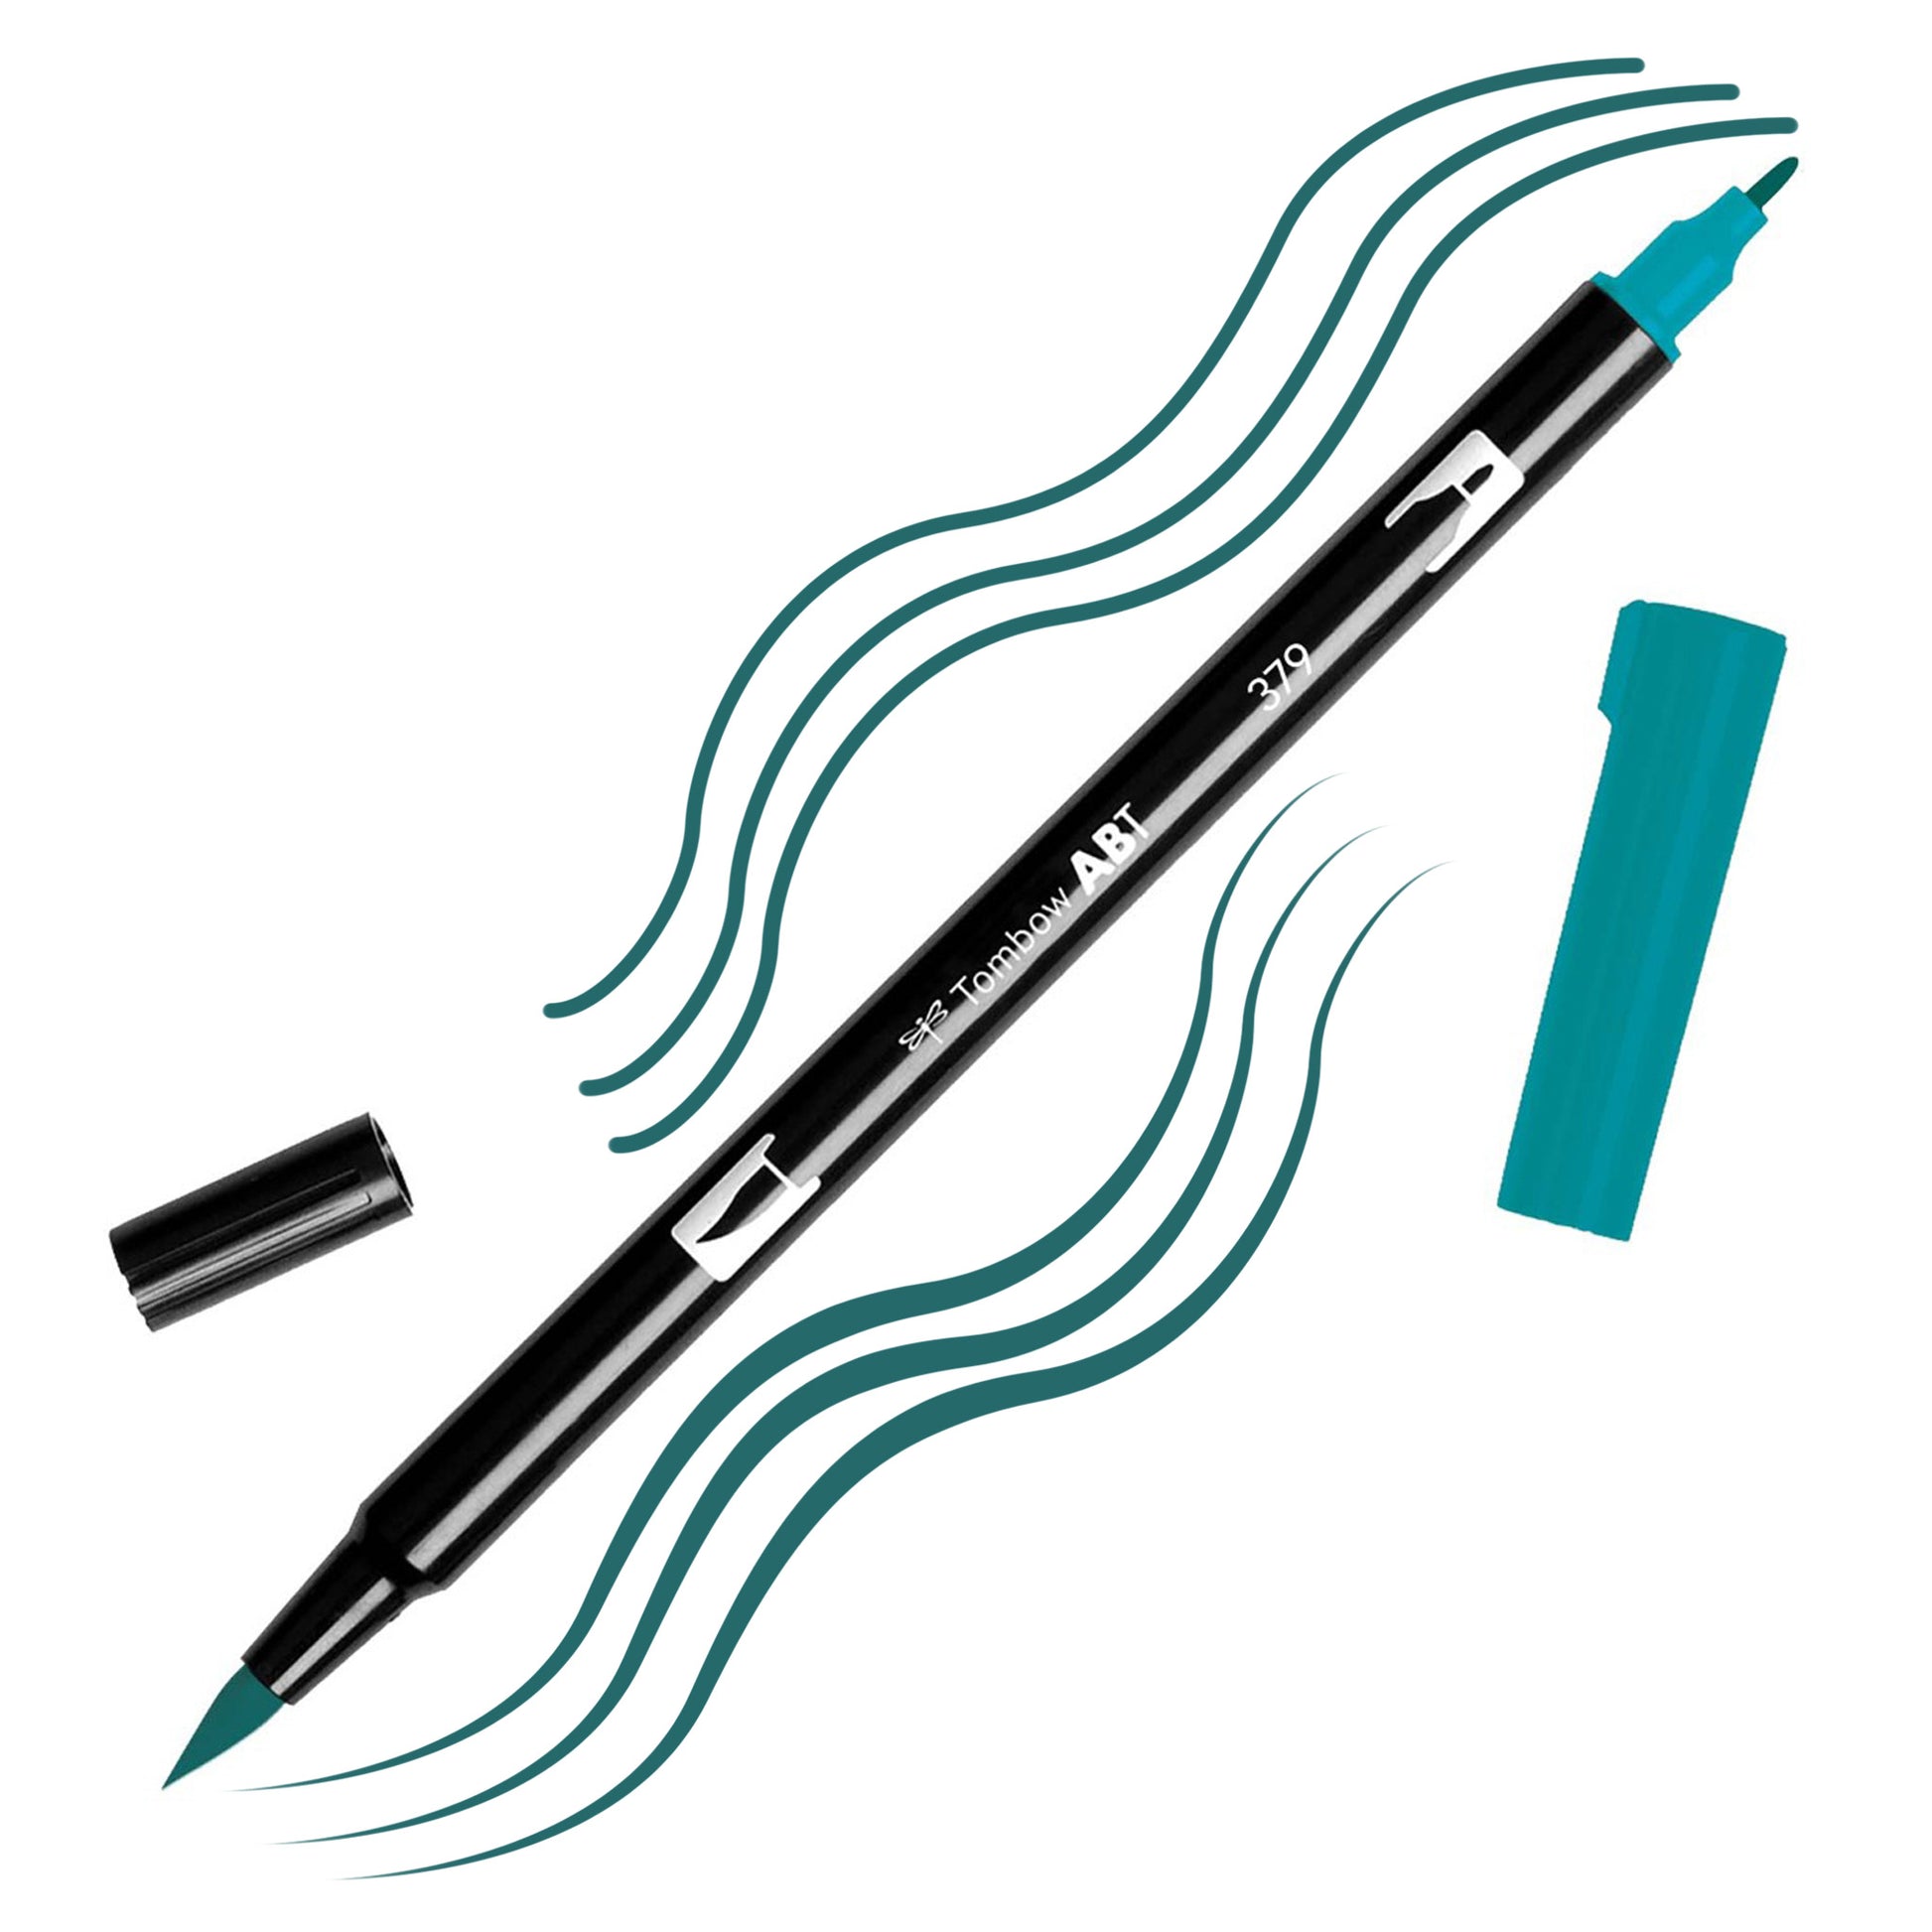 Jade Green Tombow double-headed brush-pen with a flexible nylon fiber brush tip and a fine tip against a white background with Jade Green strokes